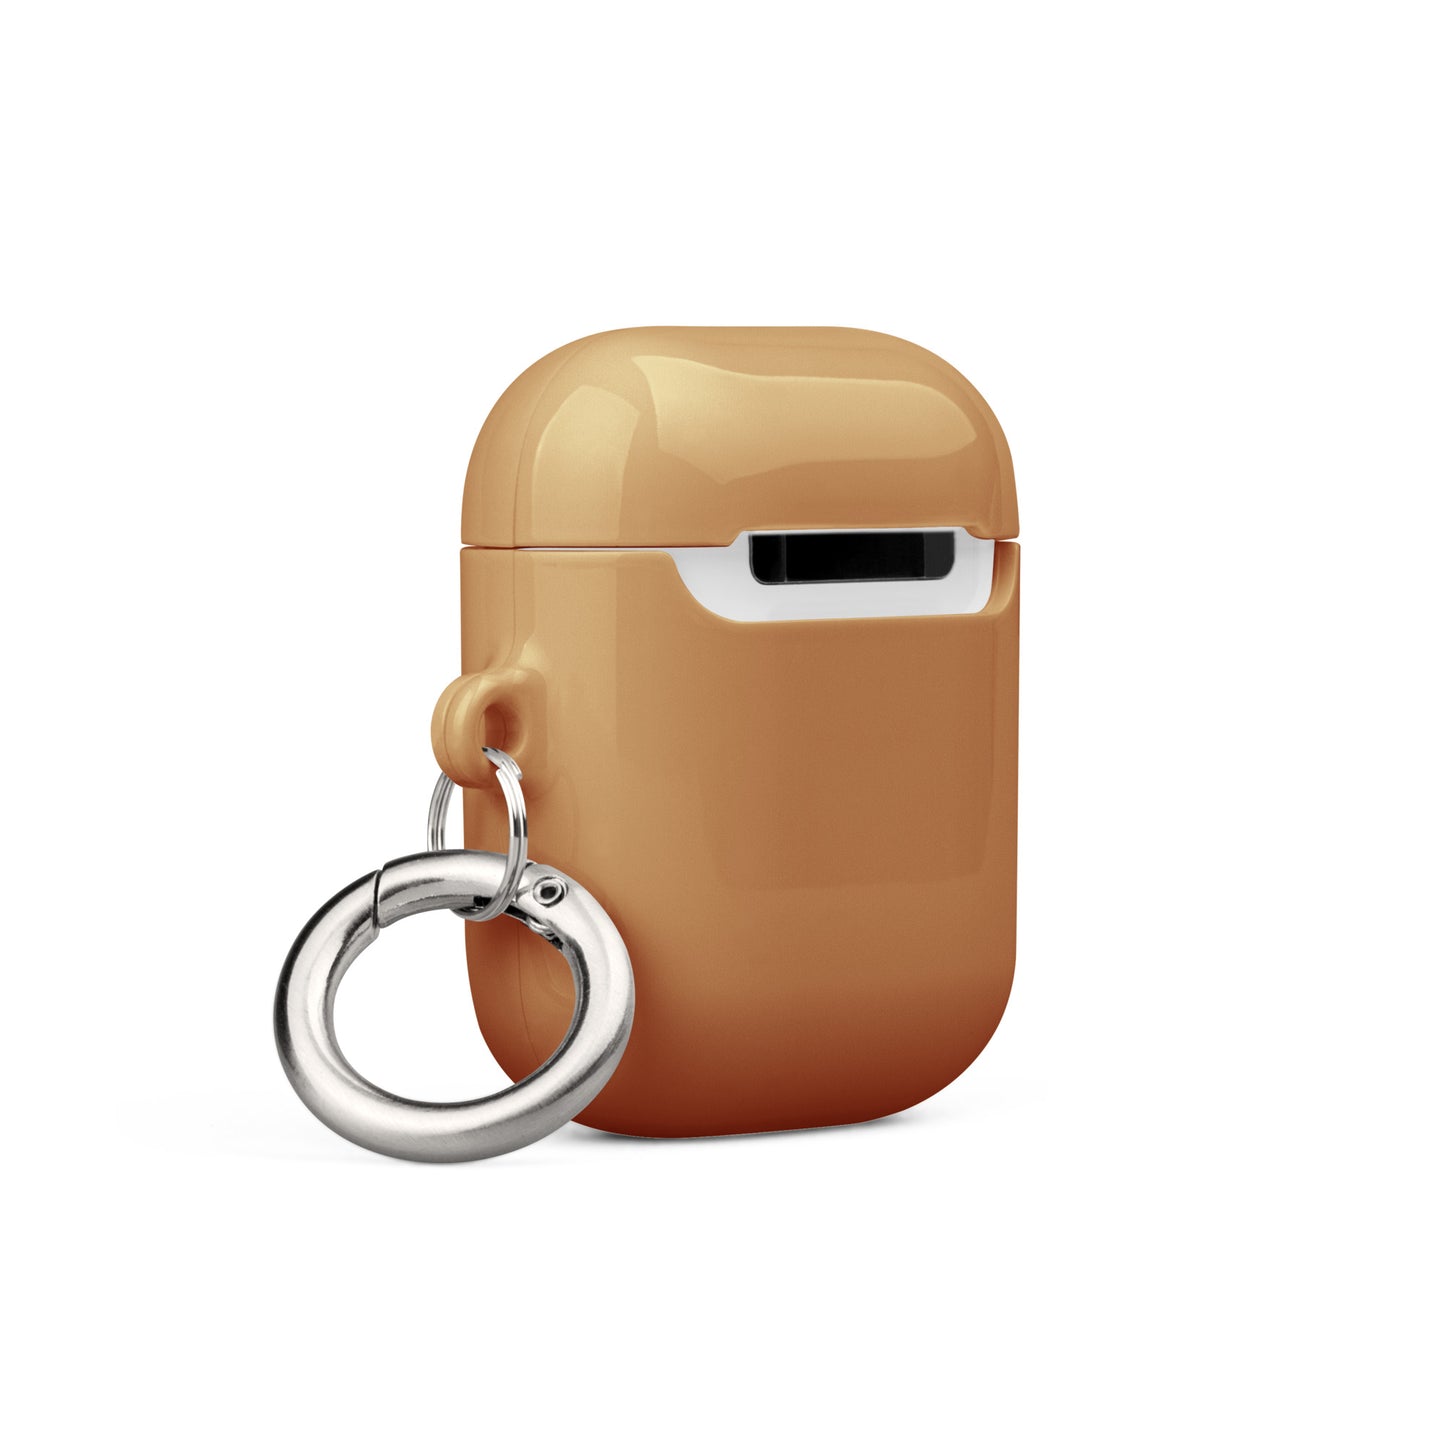 Black and Gold InficLove Logo Design Case for AirPods®